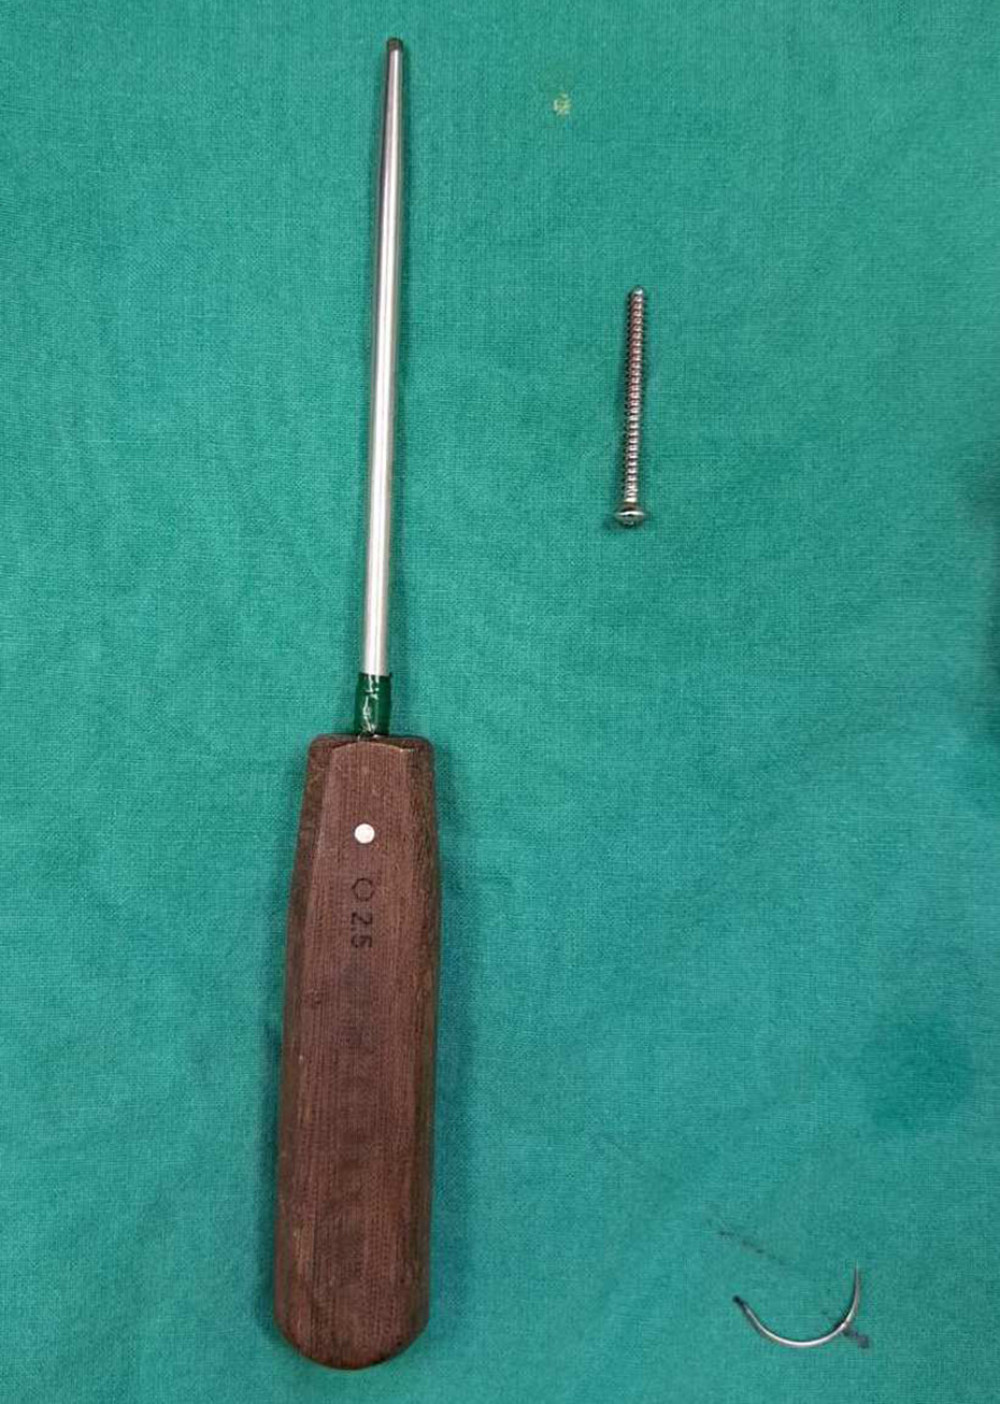 The screw and the medical screwdriver that was used for the removal.